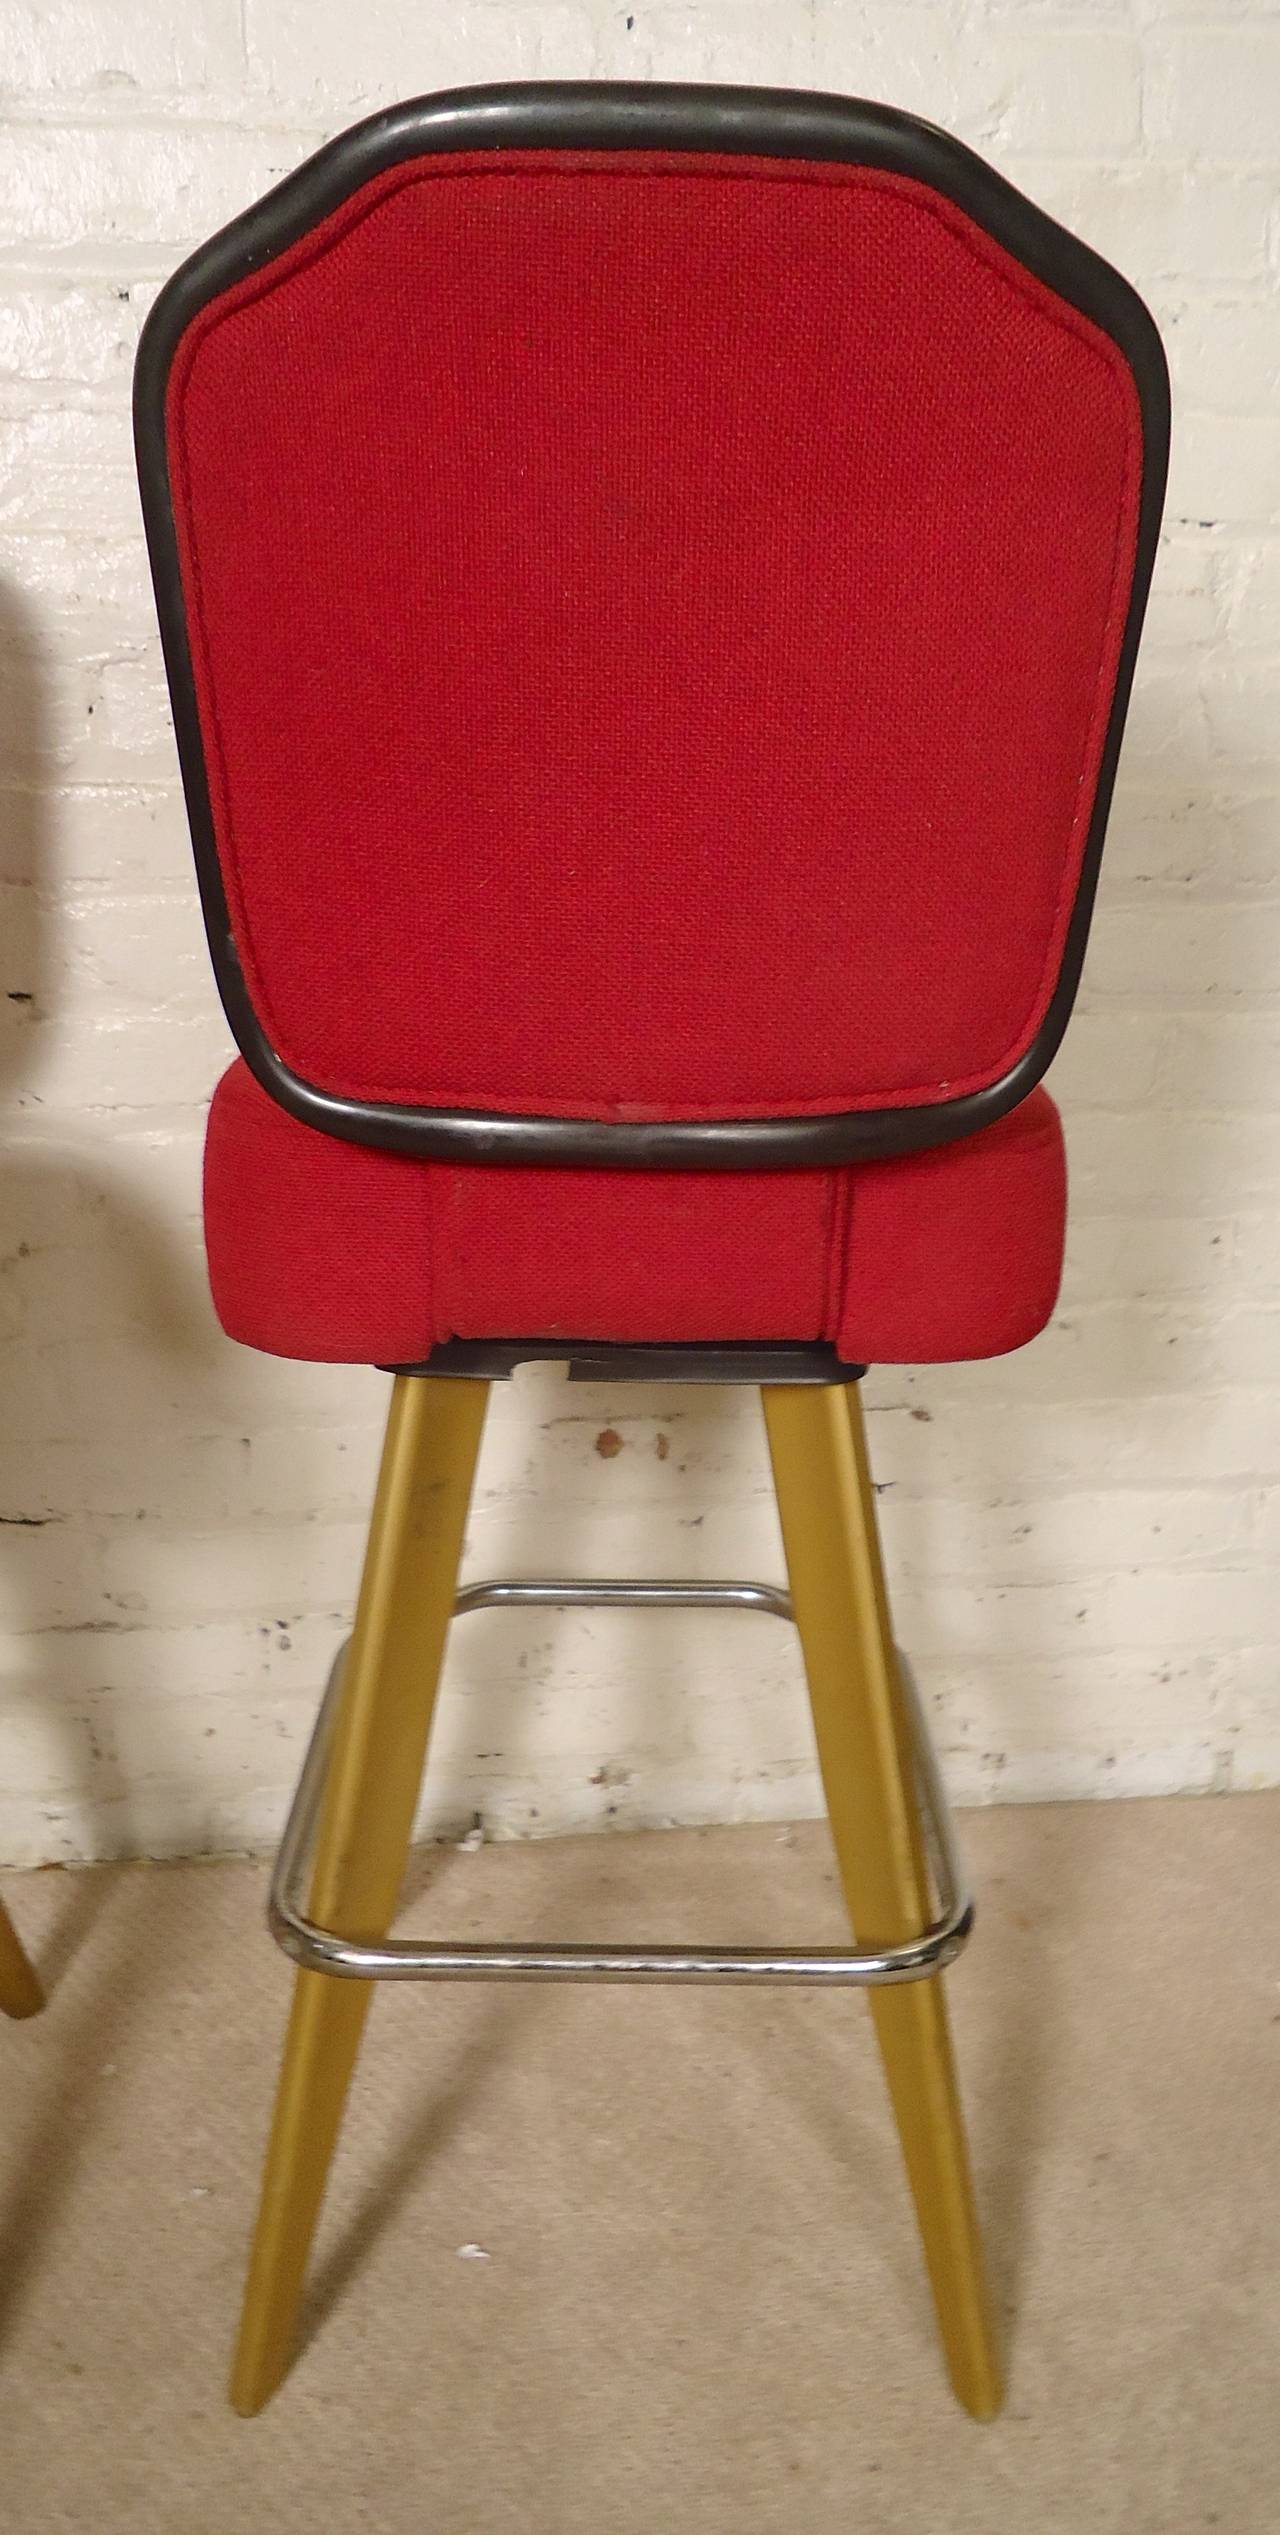 Still a family business since the 1940s, Gasser specializes in aluminum frame furniture for the hospitality industries. These stools are a great example of their high quality furniture. Perfect for your game room bar or blackjack table. 
Swivel